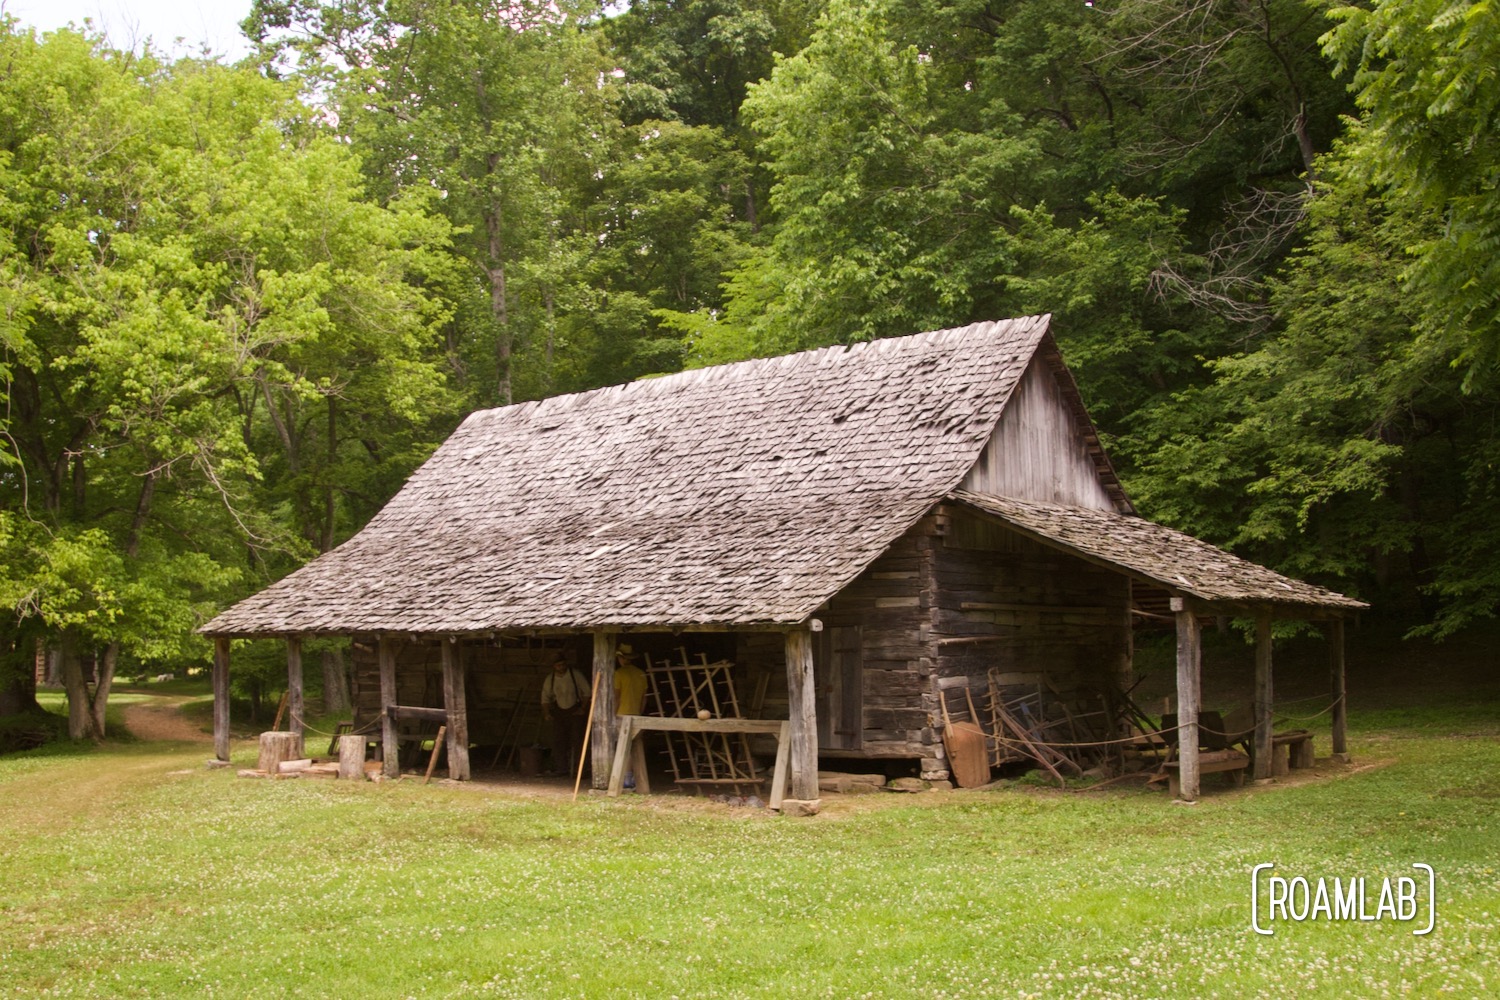 Large wood shingle log tool barn sitting in a grass field with surrounded by woods.